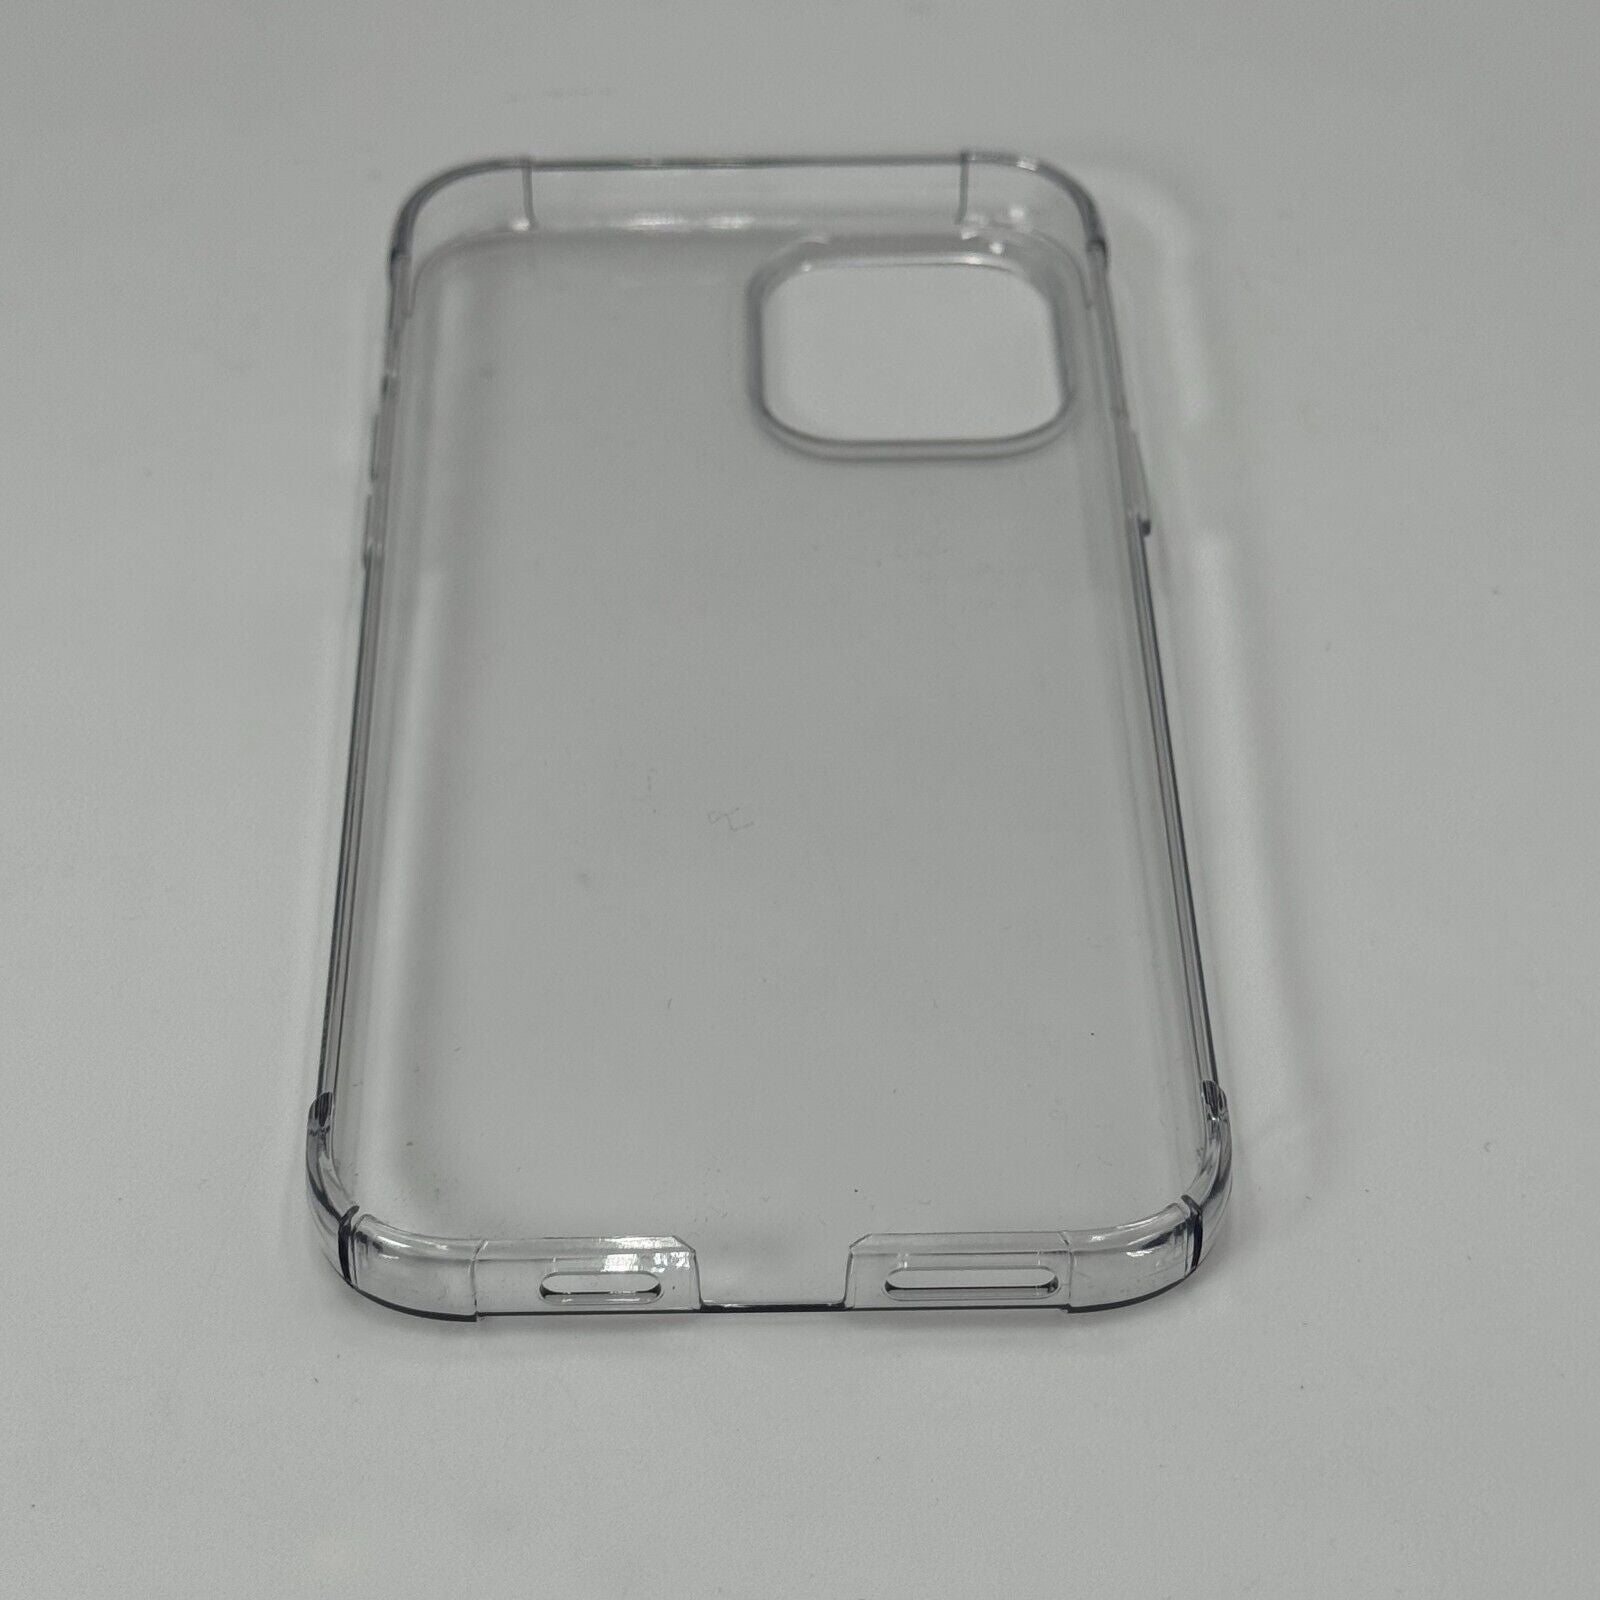 Evutec Eco Series Slim Shell Case for Apple iPhone 12 Pro Max - Clear